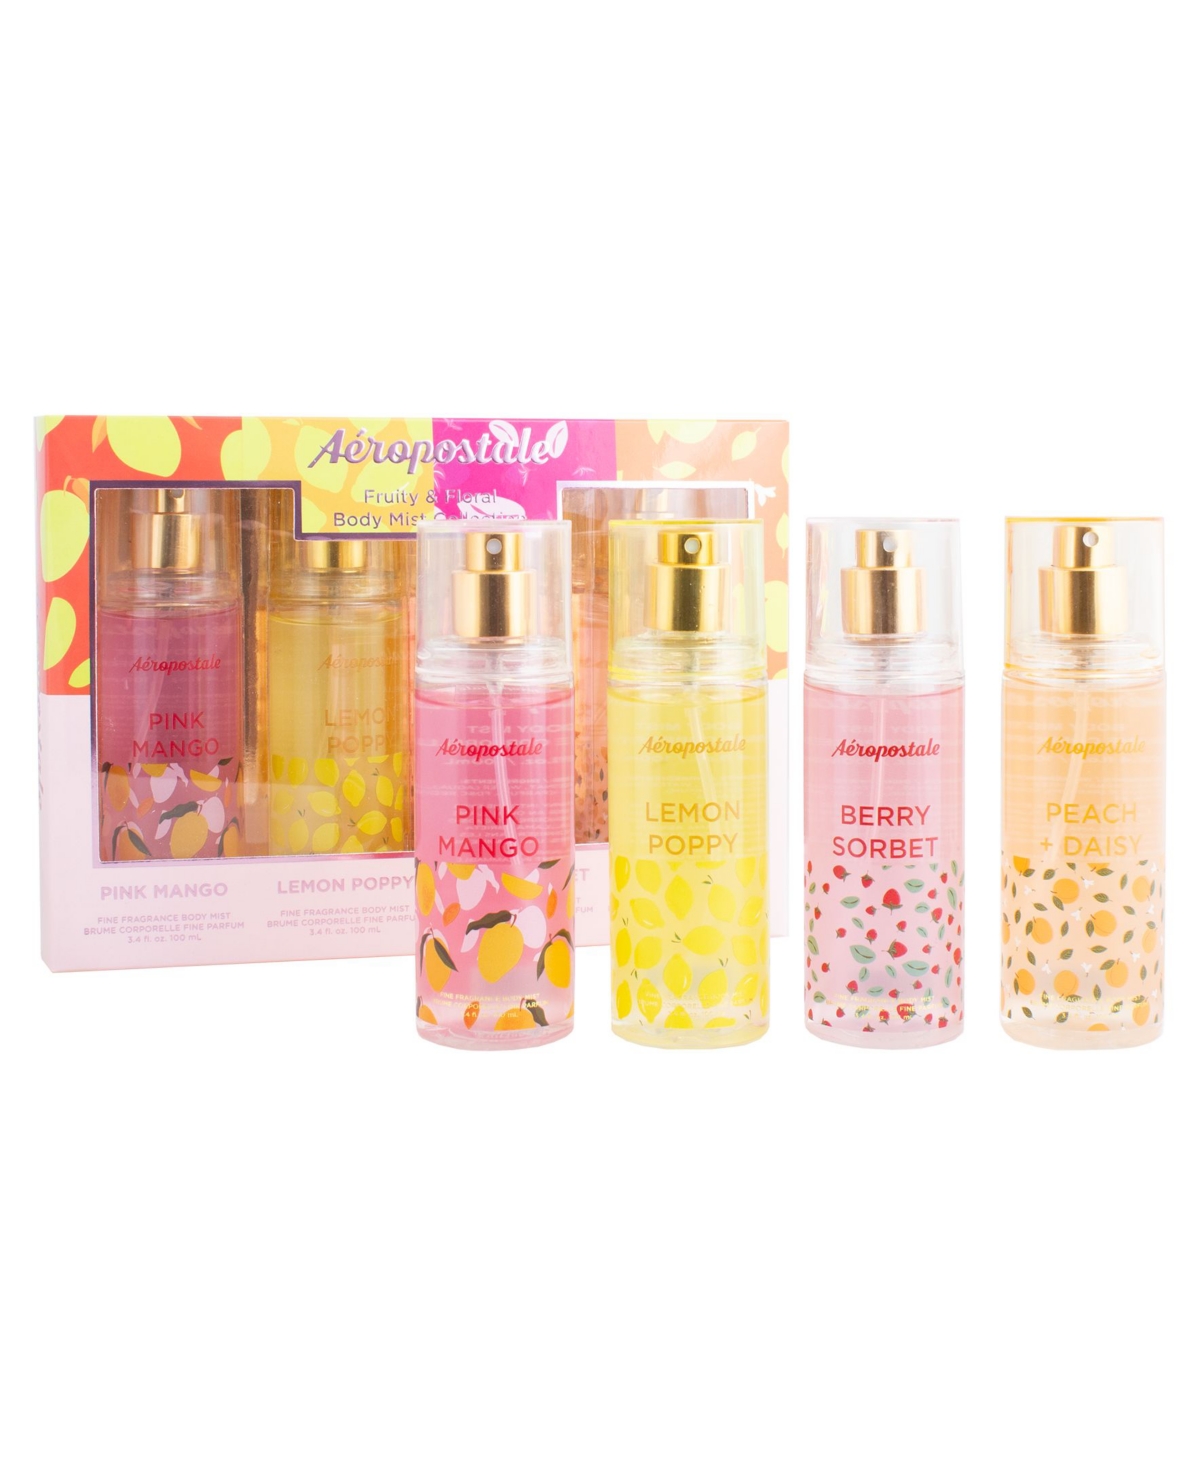 Fruity and Floral Body Mist Coffret, 4 Piece